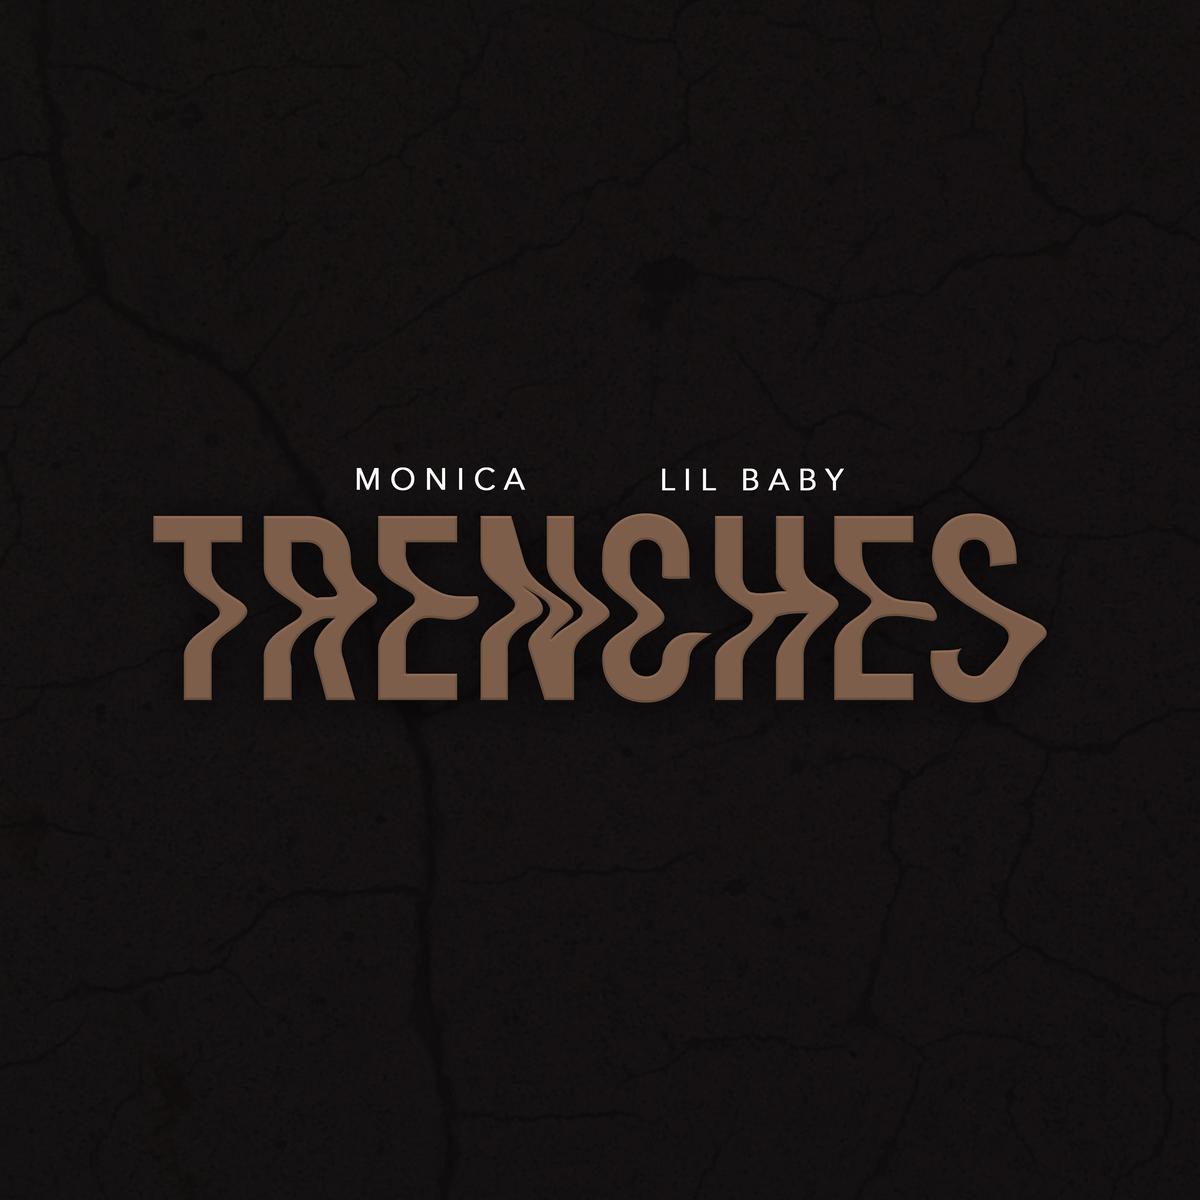 New Music: Monica & Lil Baby – Trenches (Produced by The Neptunes)